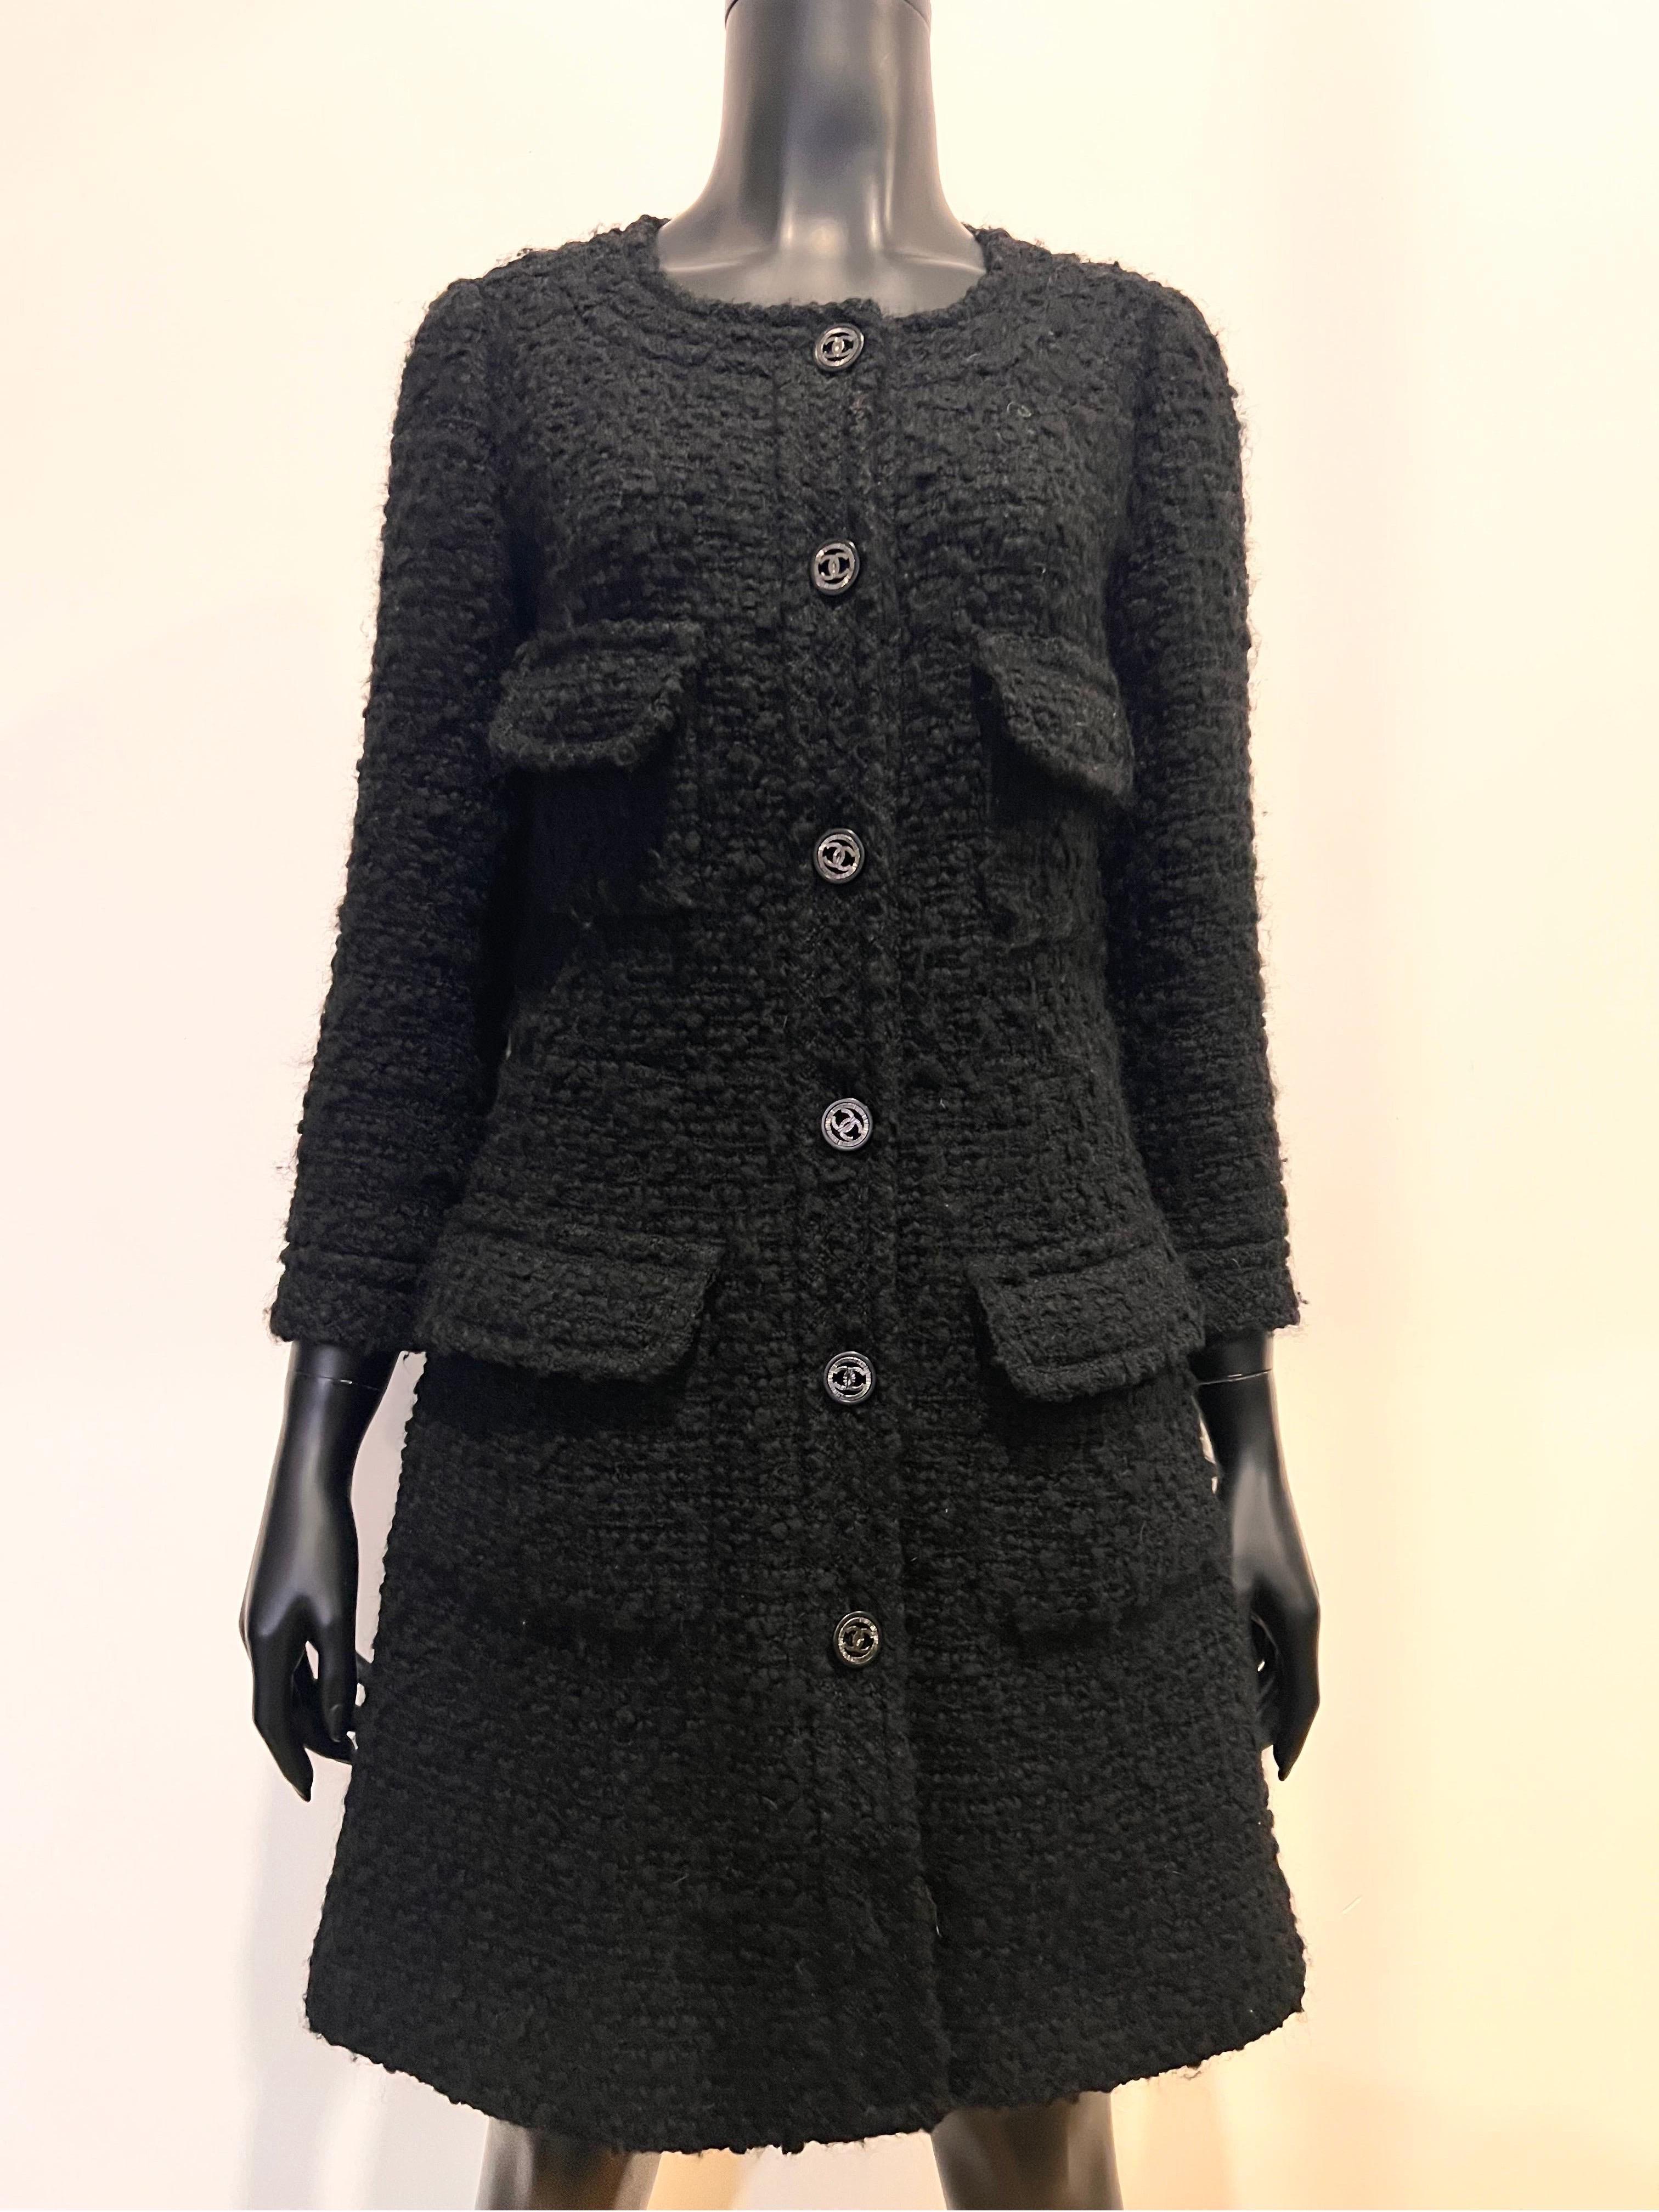 Chanel 2013 boucle tweed coat dress in black with CC details buttons  In Excellent Condition In COLLINGWOOD, AU